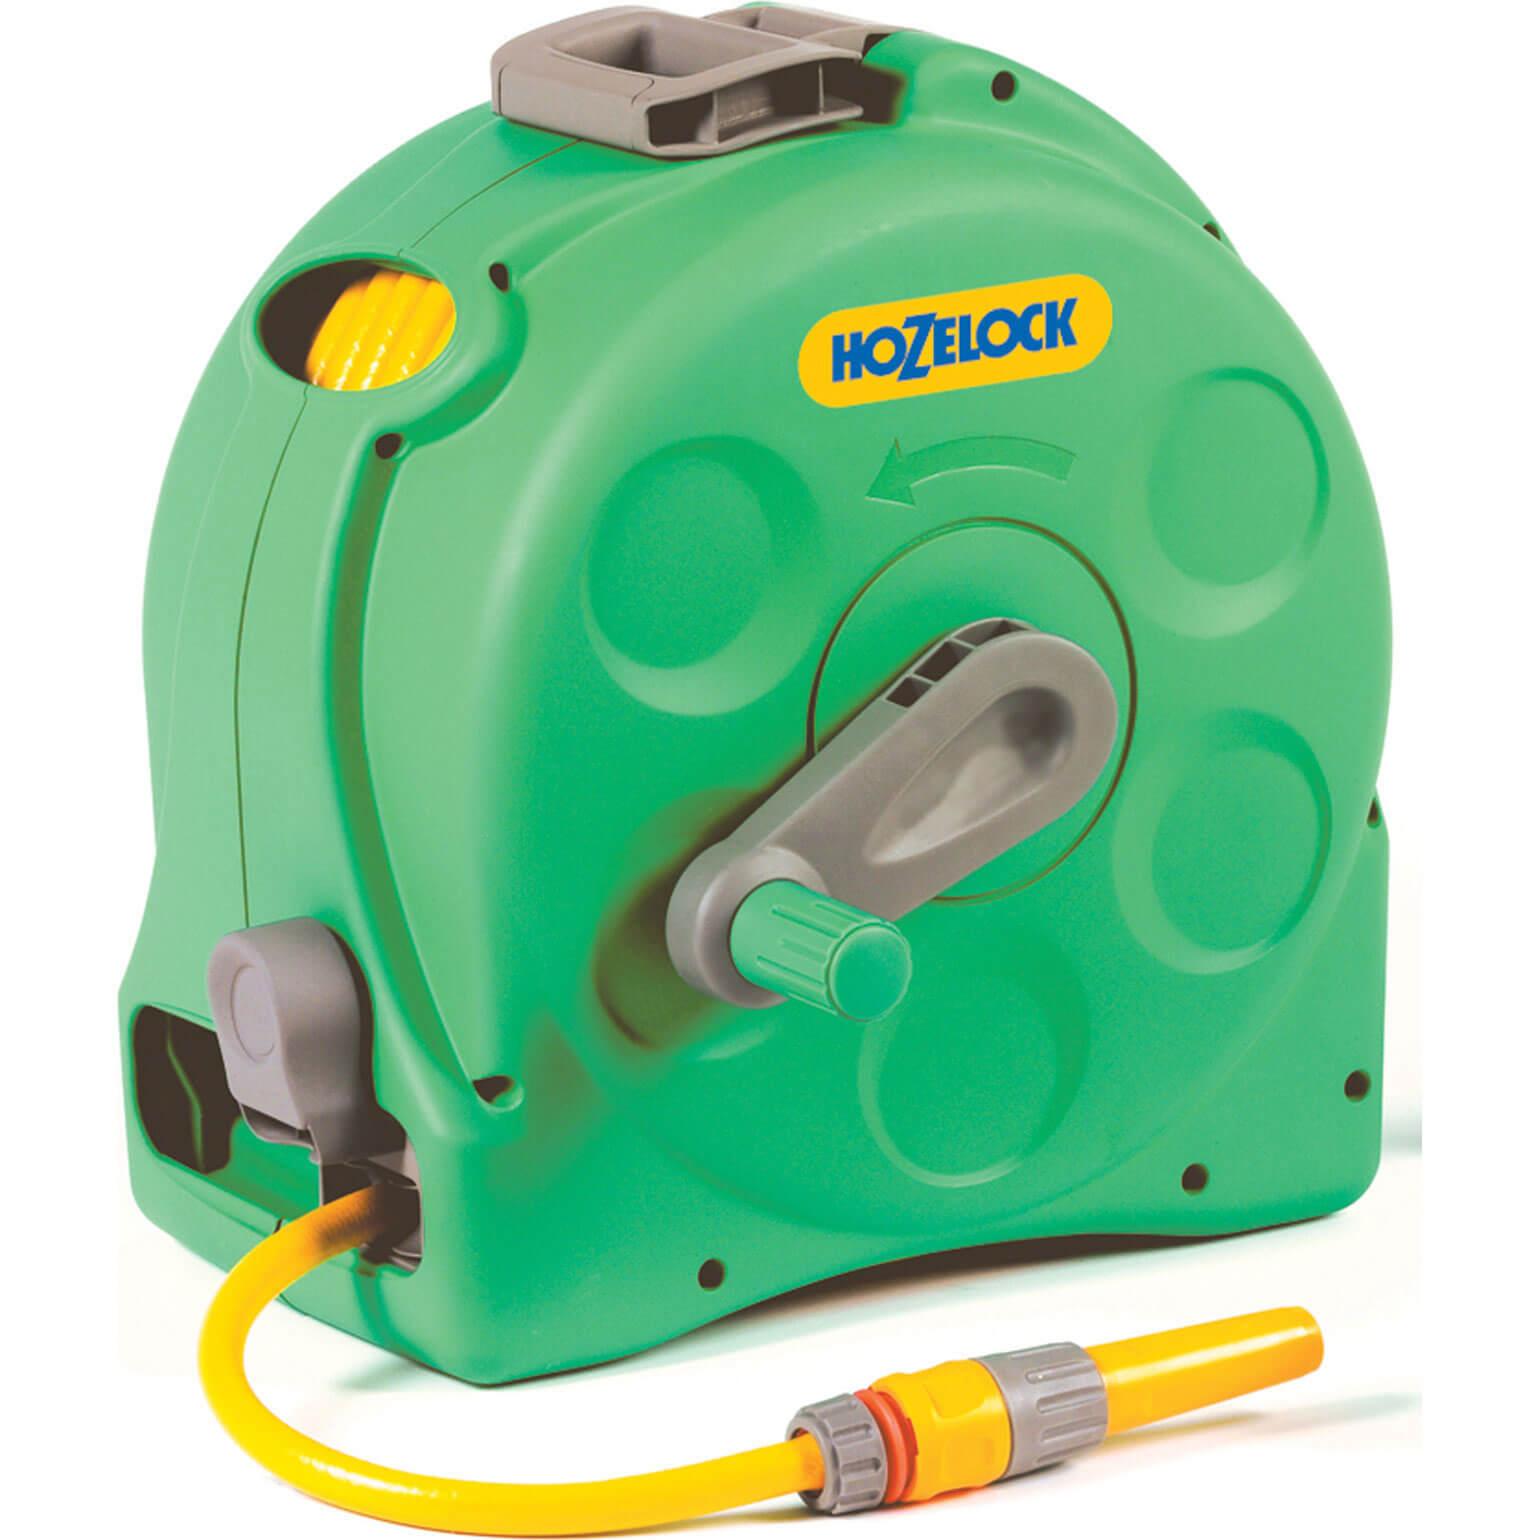 Hozelock 25m Floor Or Wall 2 In 1 Compact Hose Reel + 25m Hose + Connectors